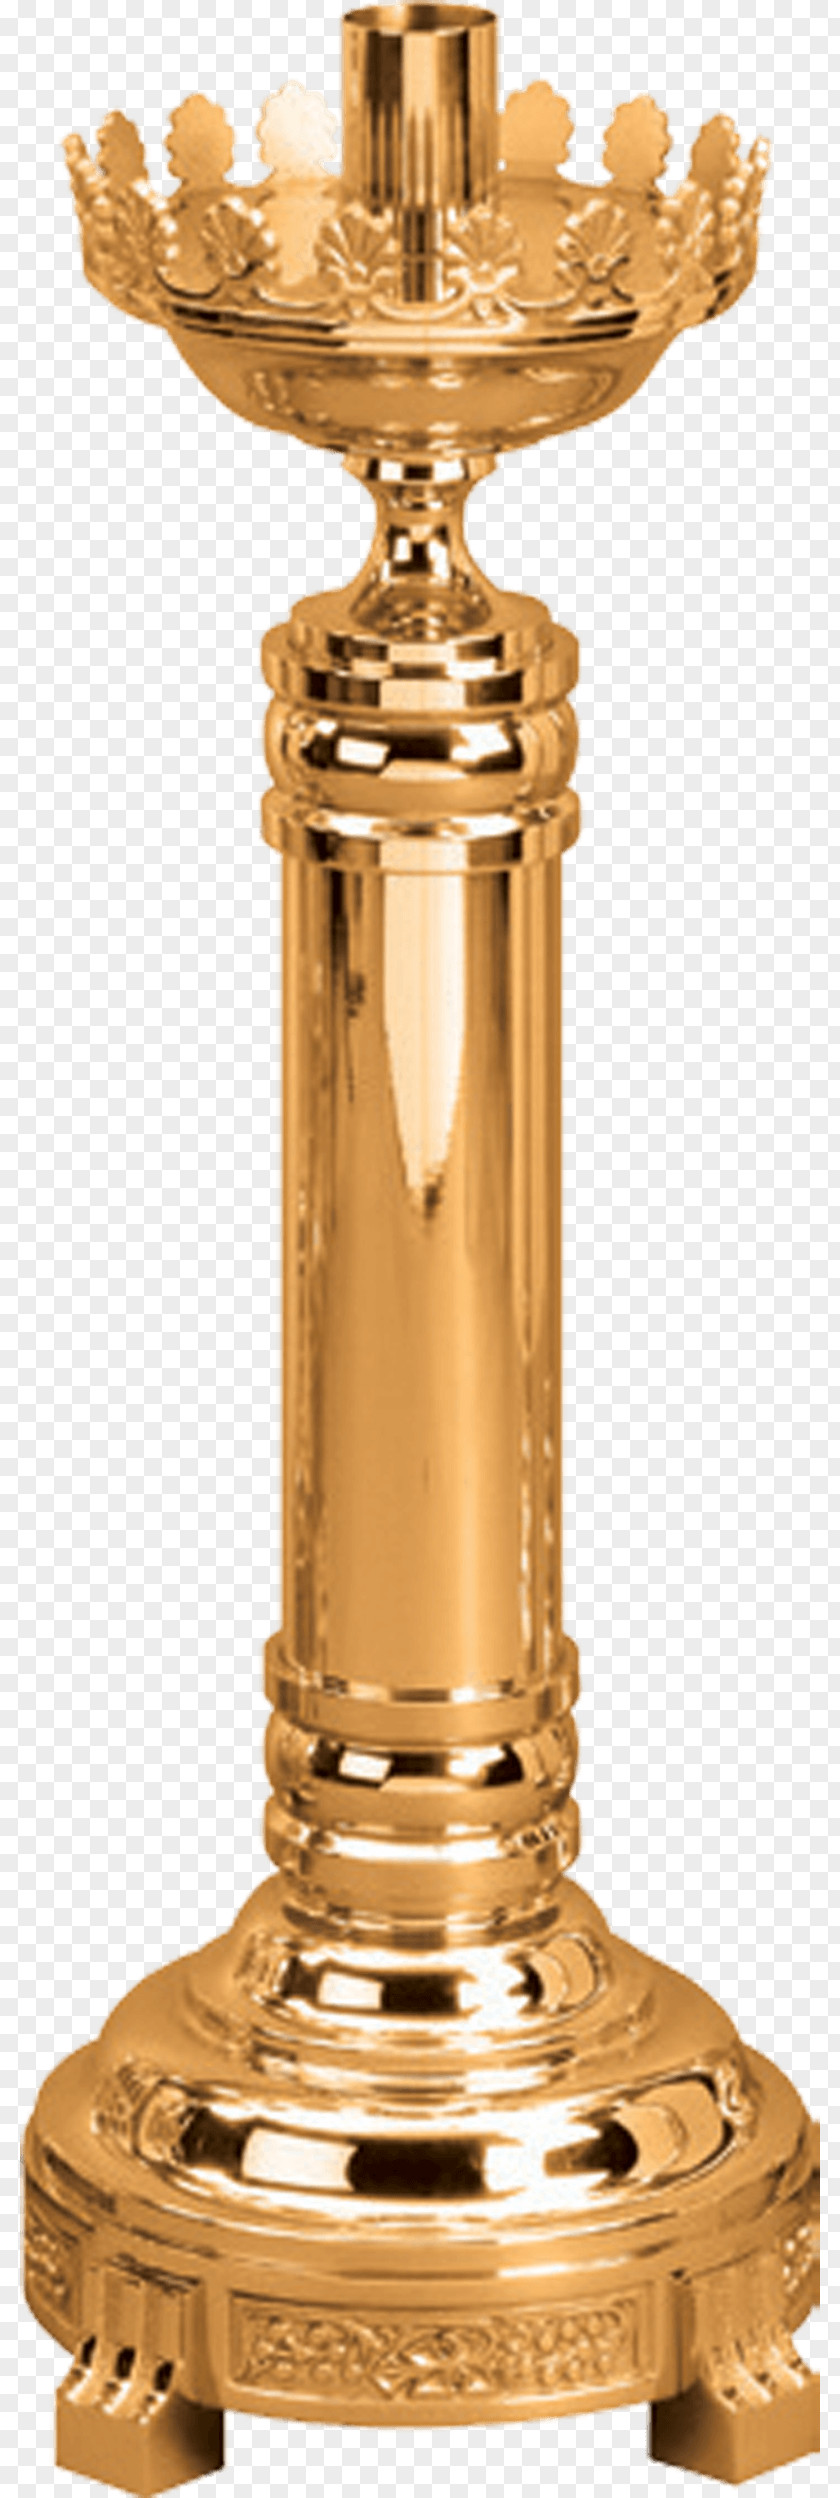 Paschal 01504 Trophy Material Candle Inch PNG